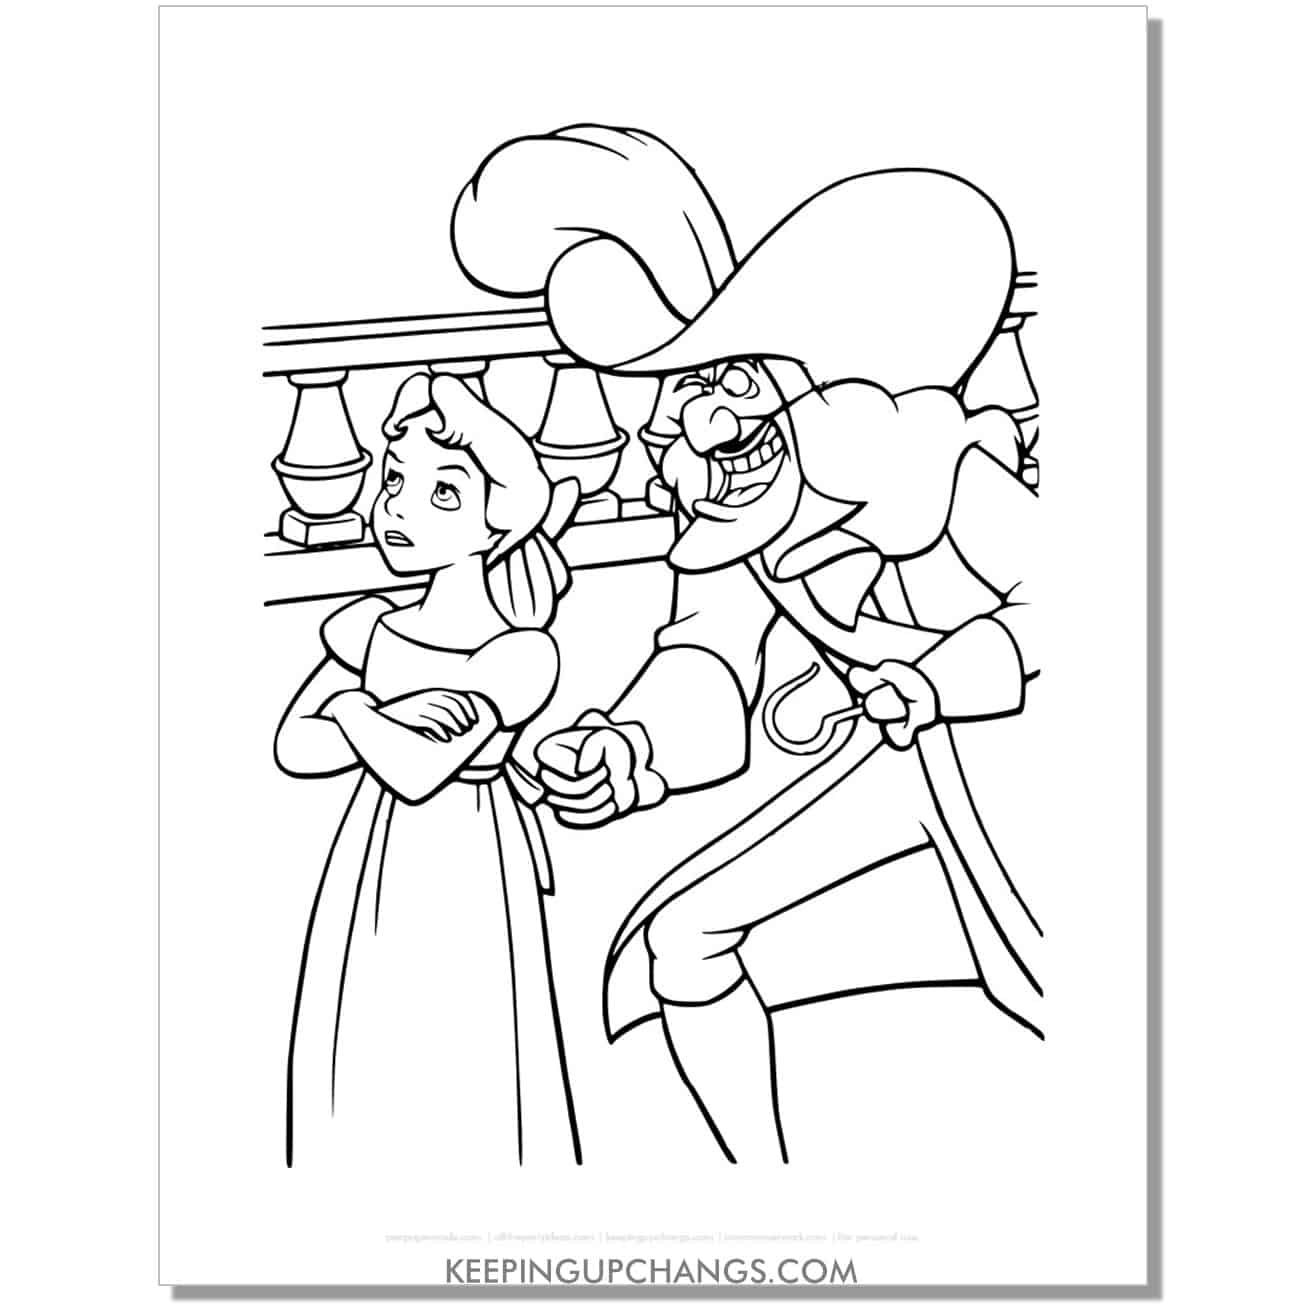 wendy darling and captain hook coloring page, sheet.